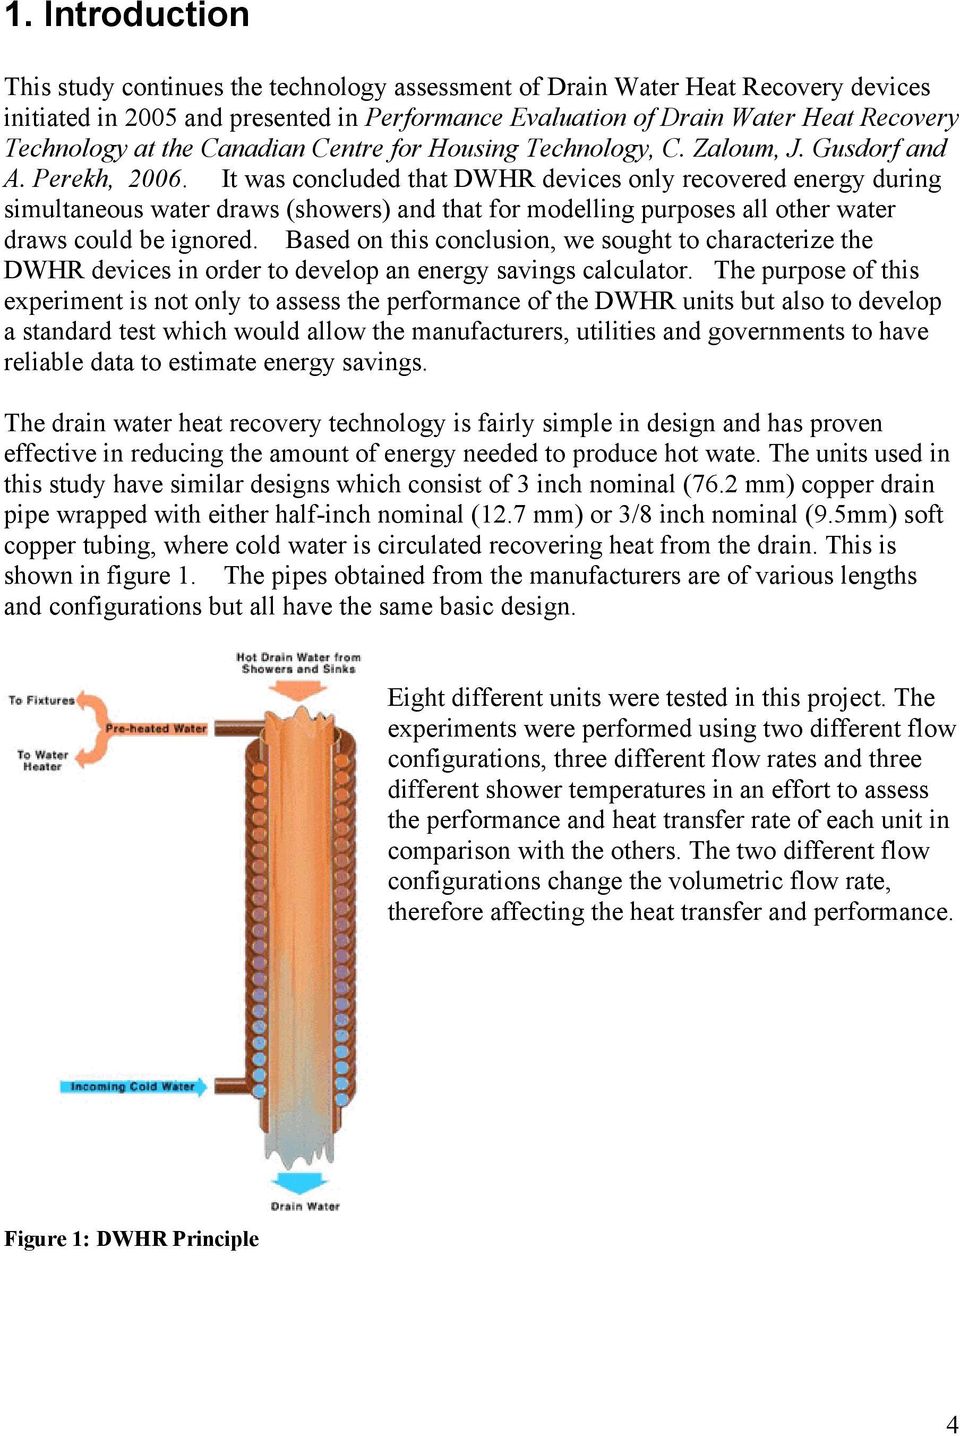 It was concluded that DWHR devices only recovered energy during simultaneous water draws (showers) and that for modelling purposes all other water draws could be ignored.